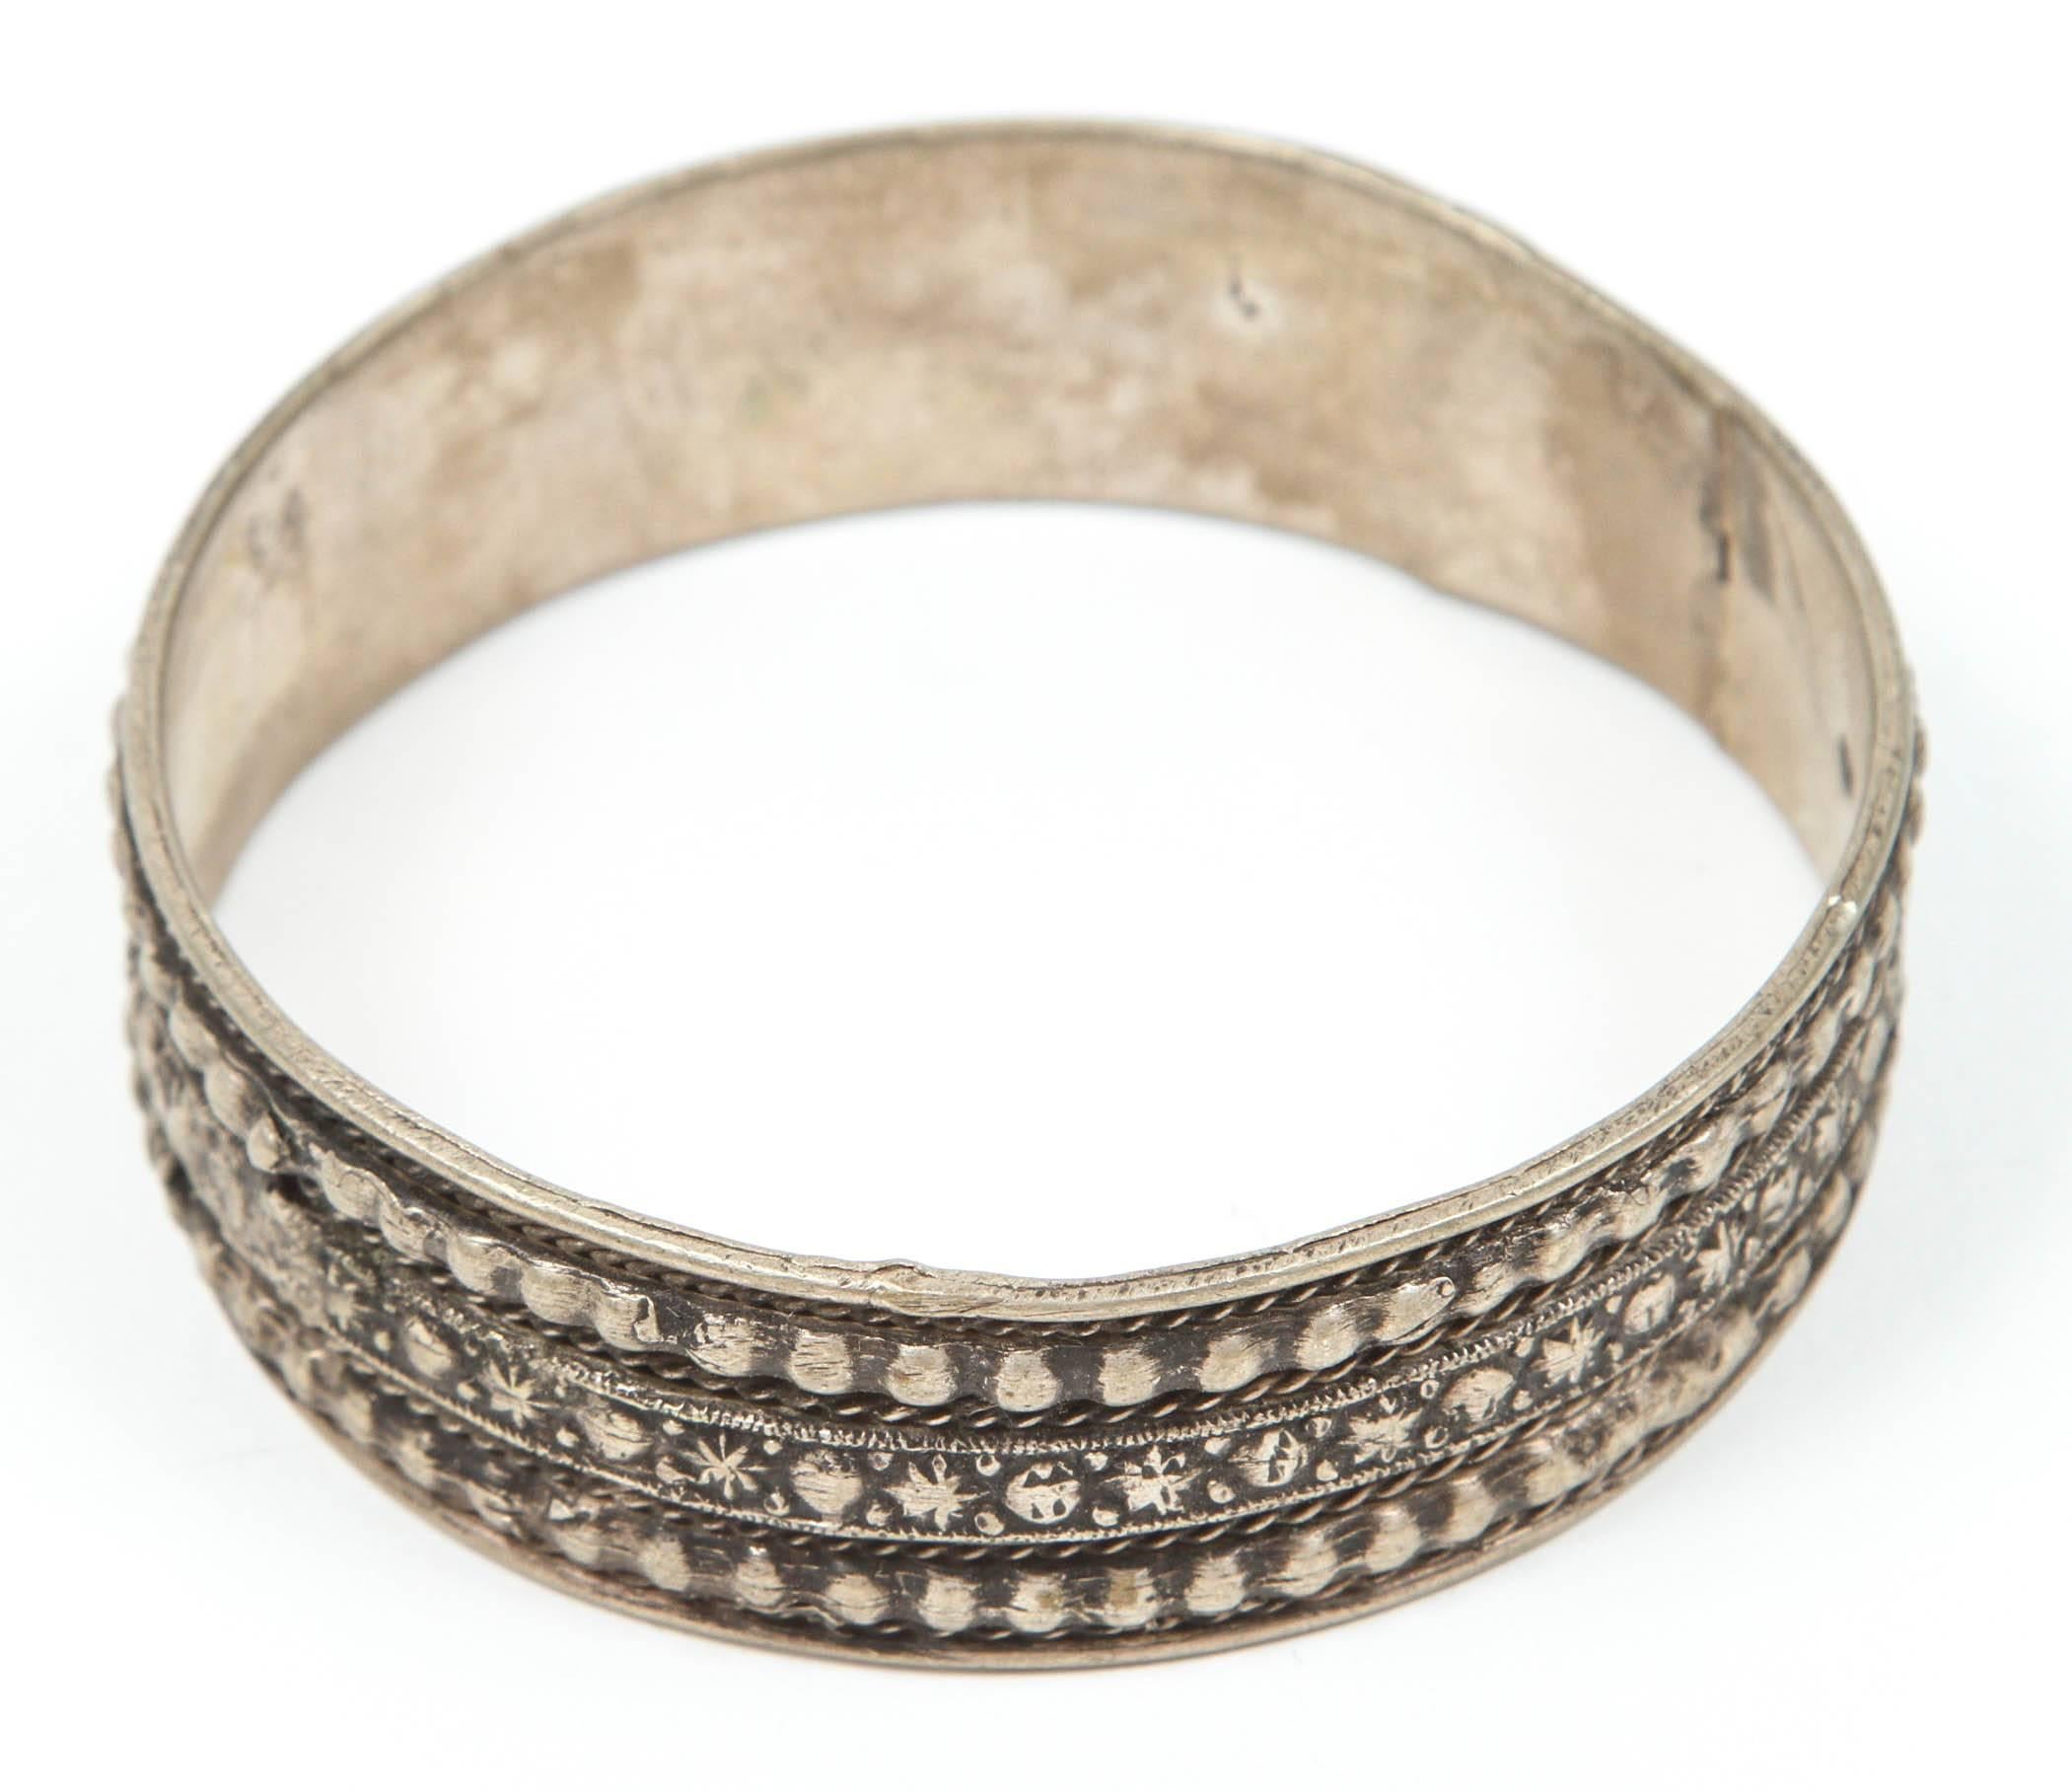 Moroccan tribal silver bracelet from the High Atlas of Morocco. 
Handcrafted by Berber women using Moroccan silver nickel. 
The ethnic Nomadic and Bedouin jewelry in the Maghreb and North Africa is usually made of silver and the designs are